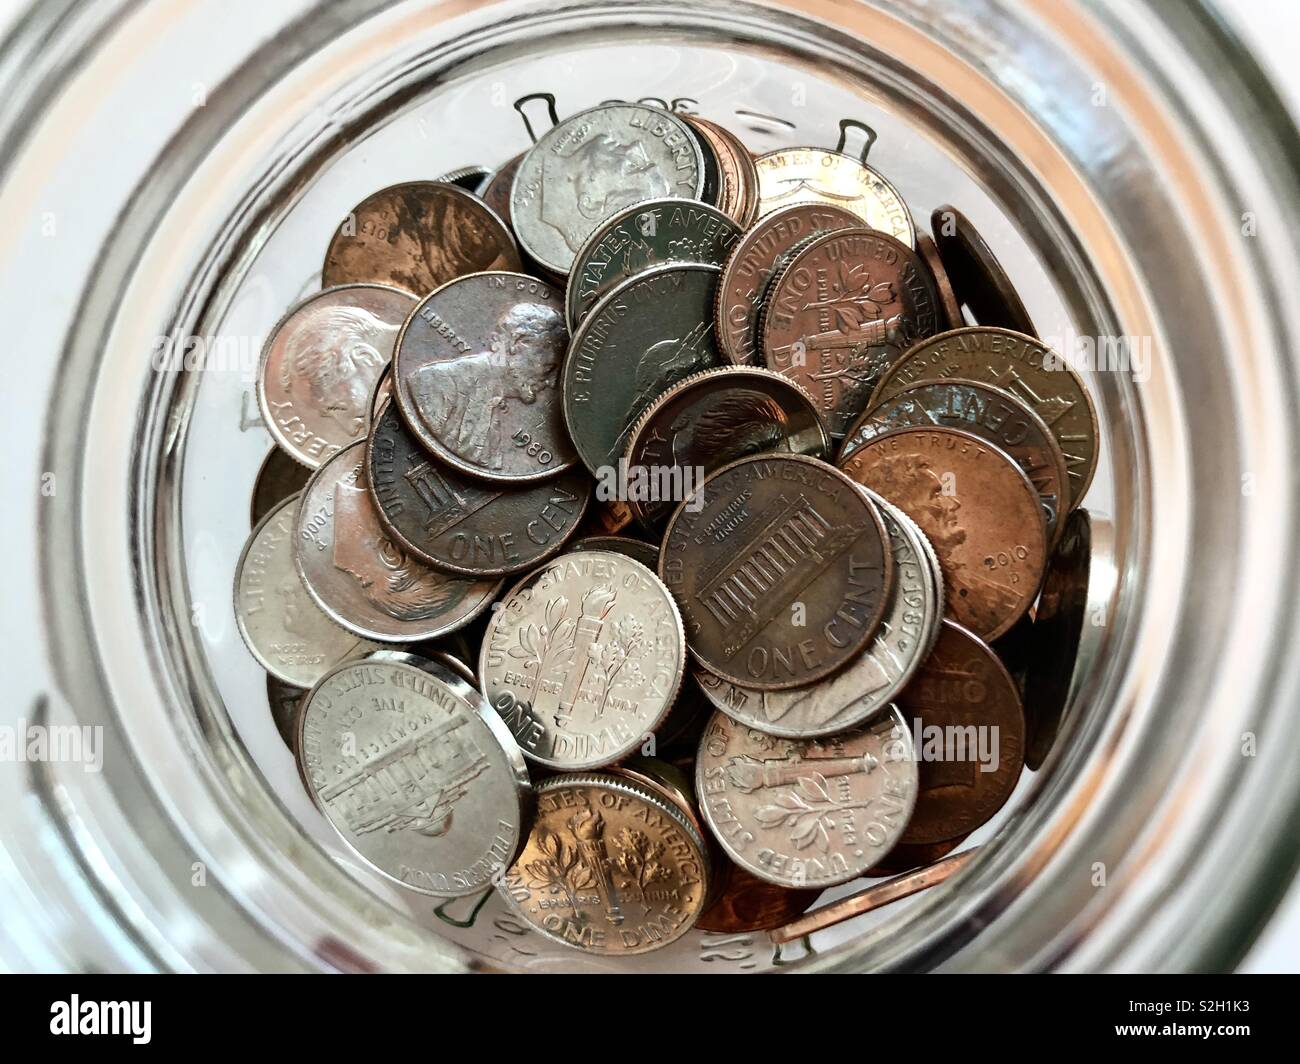 Top view of coins in a glass jar Stock Photo